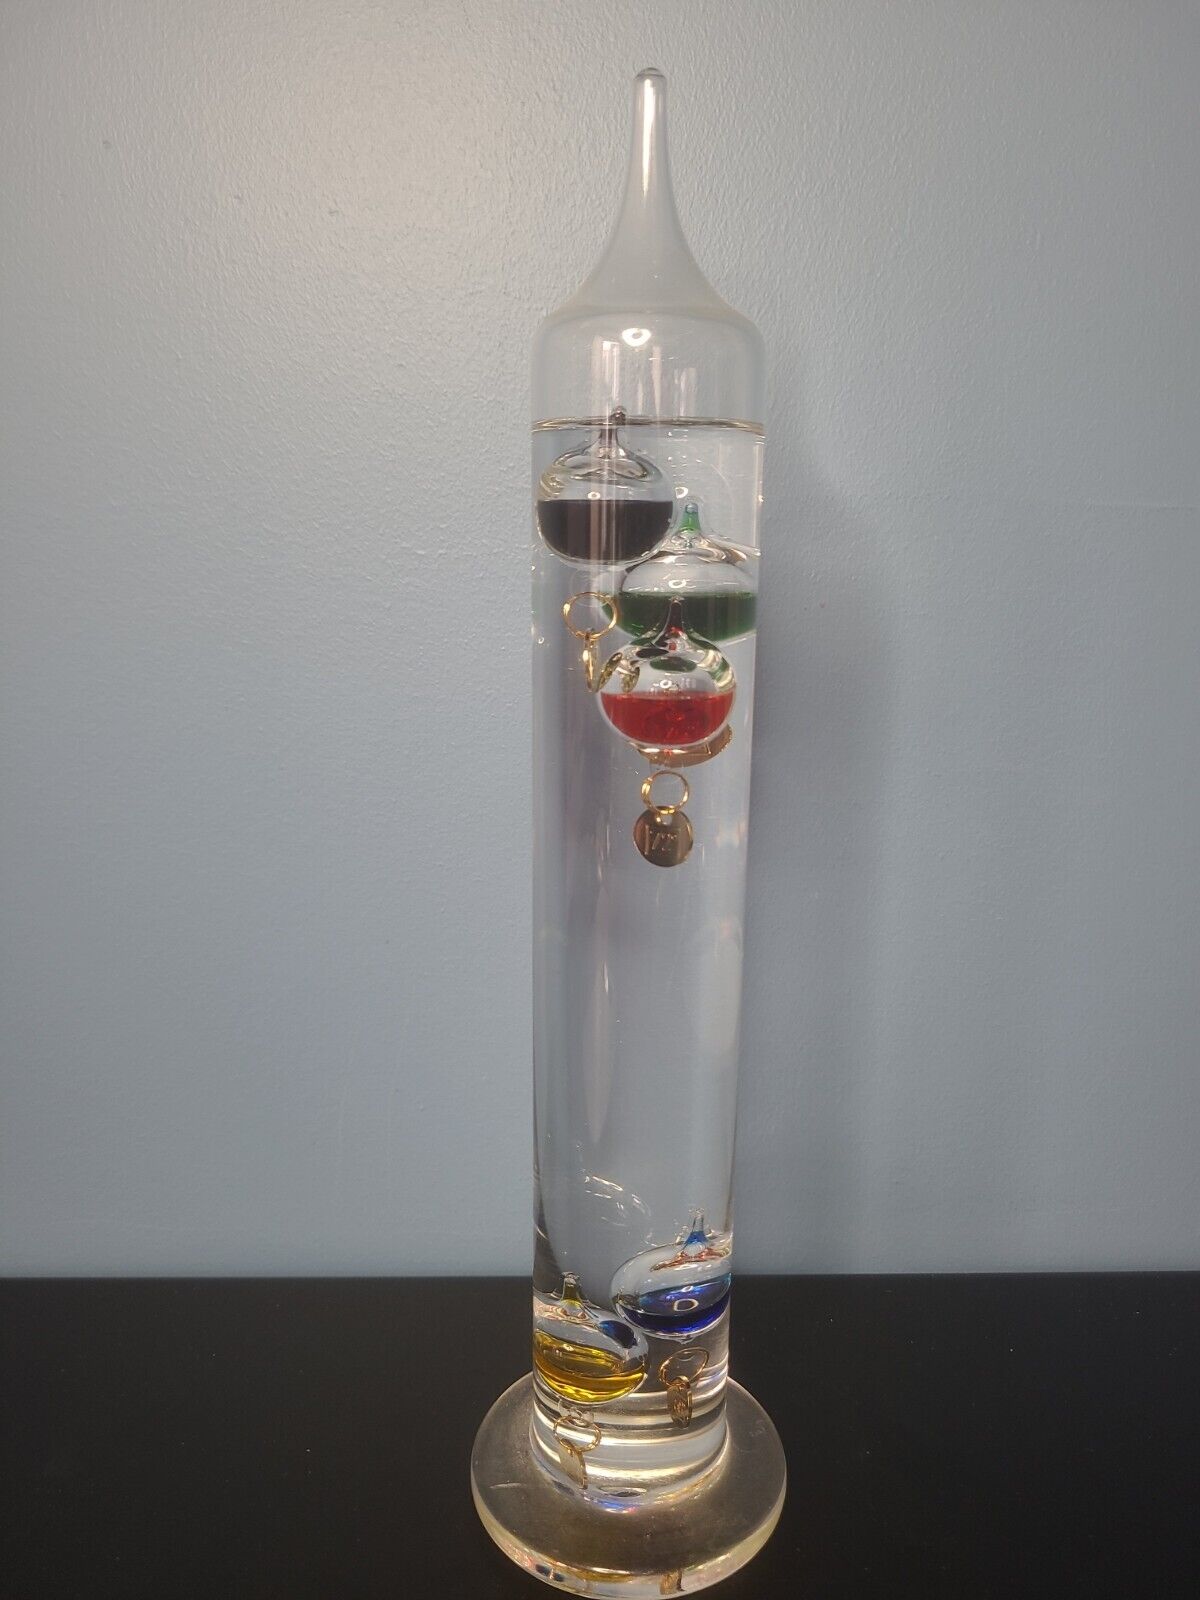 Galileo Large Thermometer 13” Tall  Glass Tube w/ Floating Spheres Home Decor